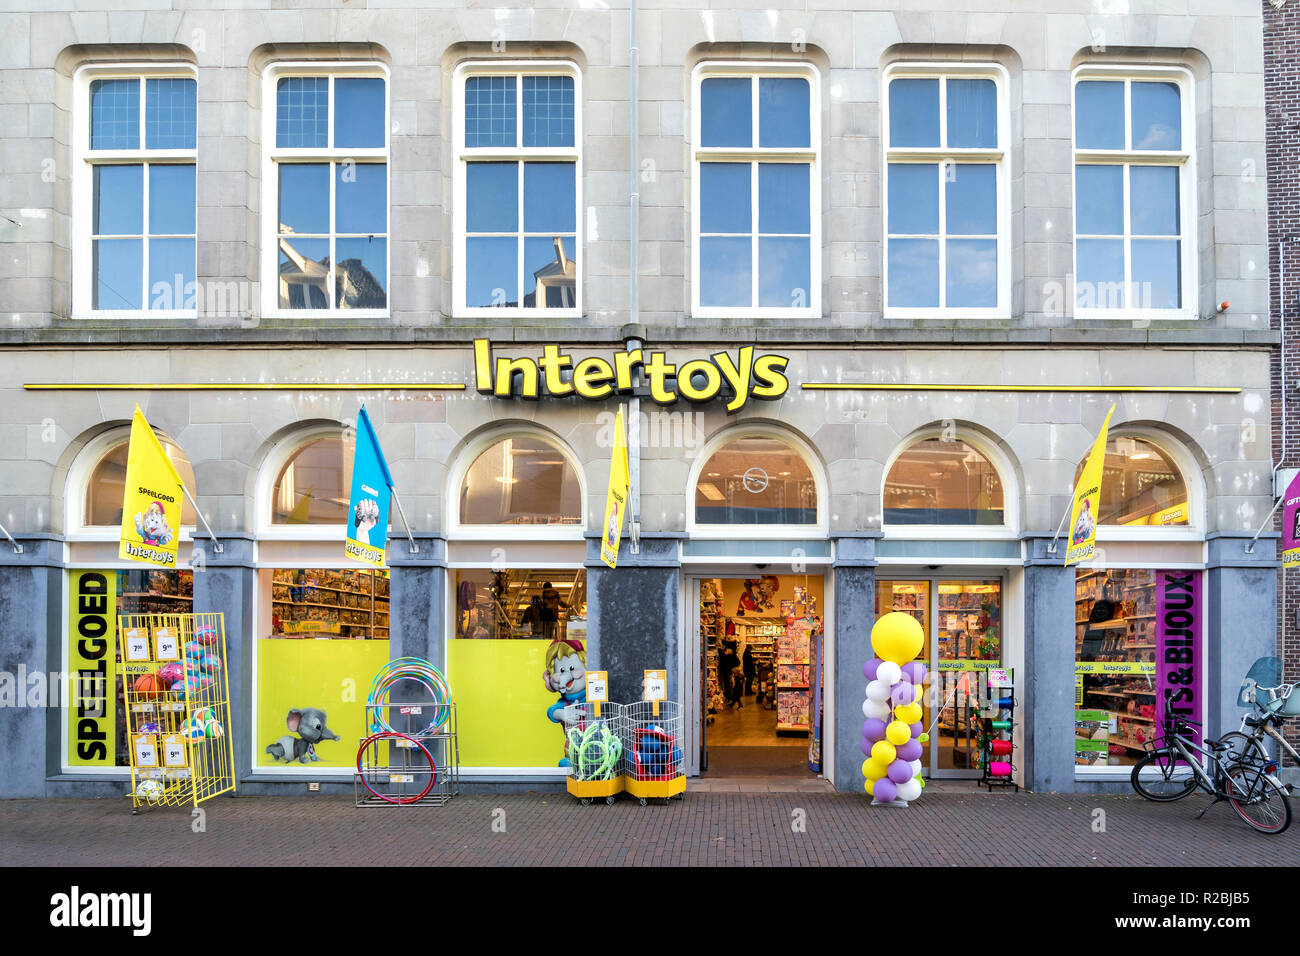 Intertoys High Resolution Stock Photography and Images - Alamy